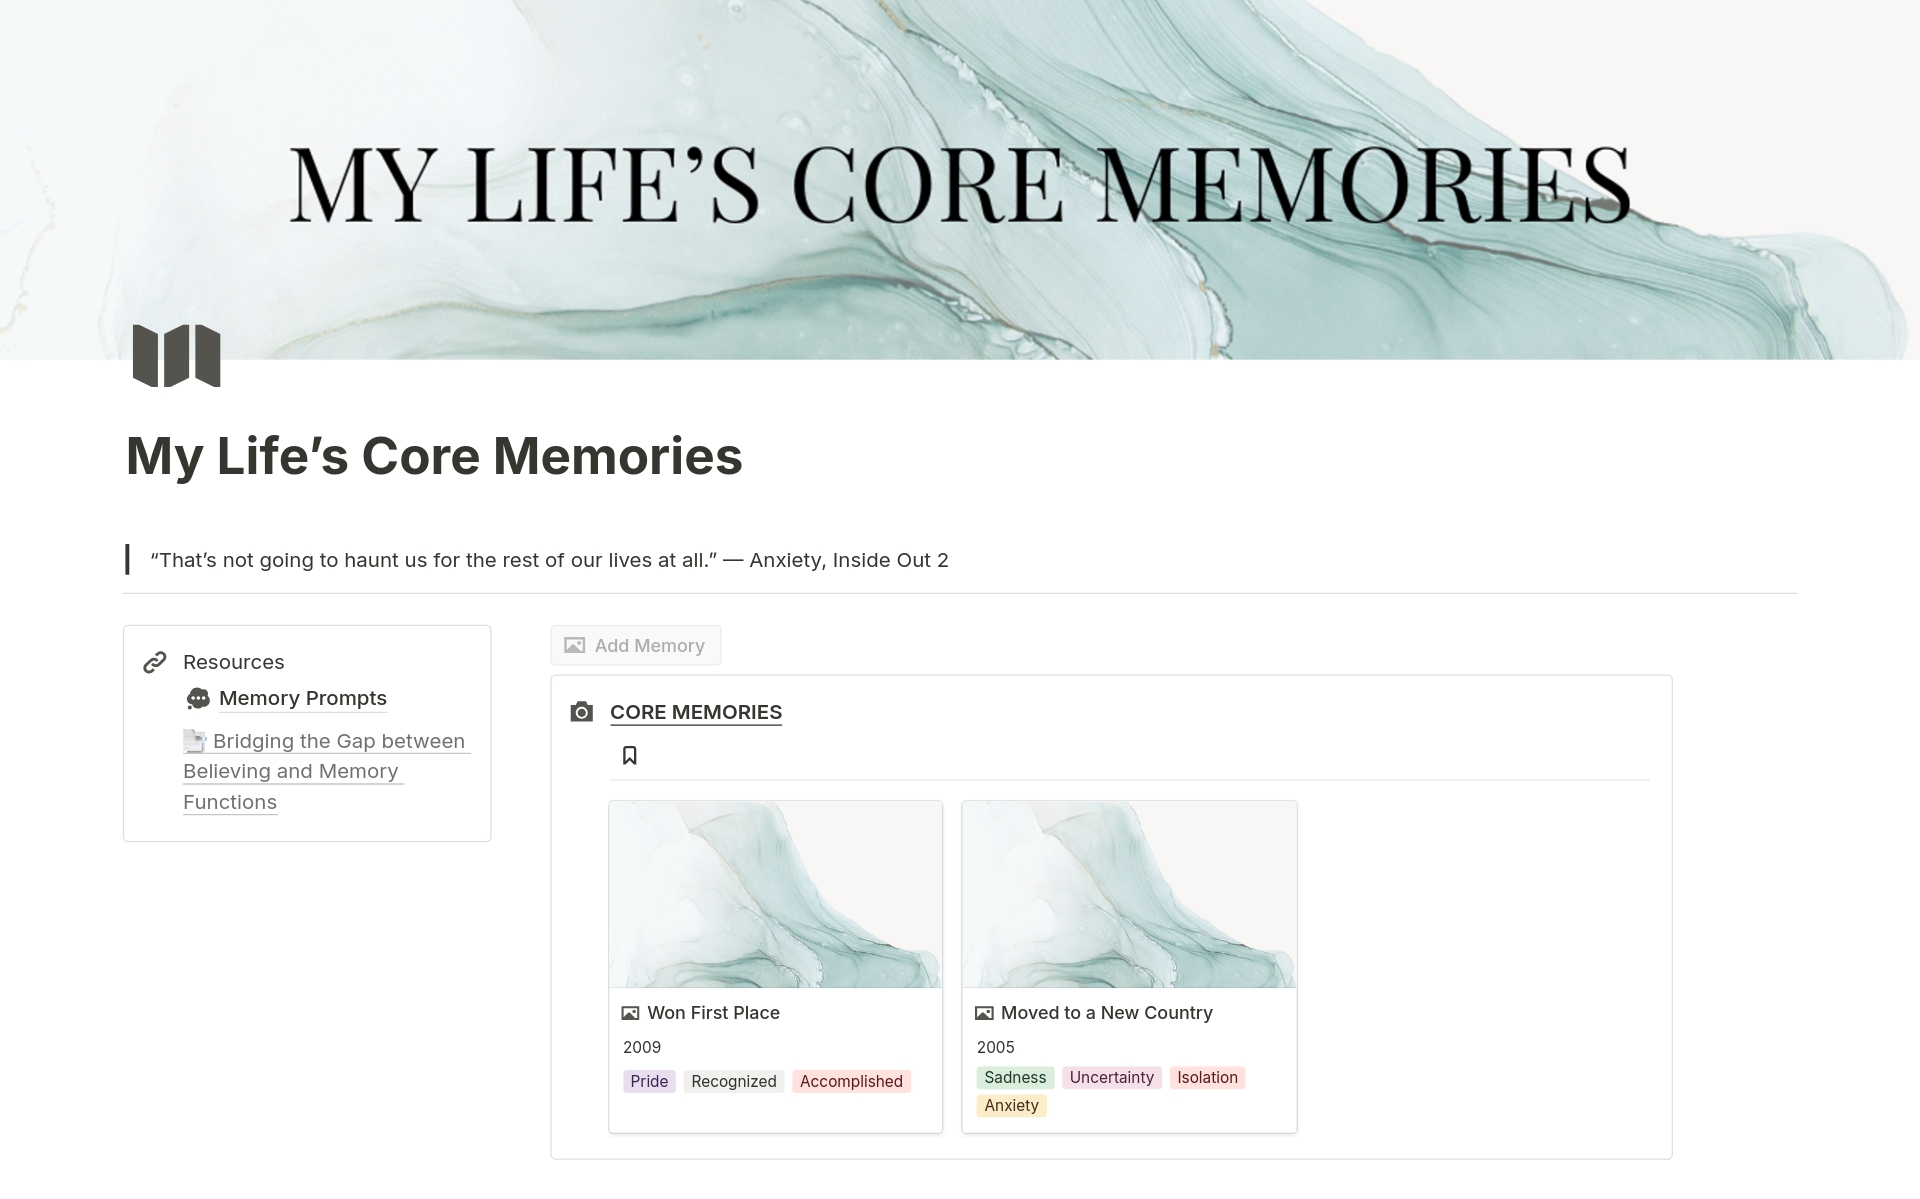 My Life's Core Memories is a reflective journal designed to help you capture and explore significant life events that have shaped your beliefs and perspectives through their emotional impact.